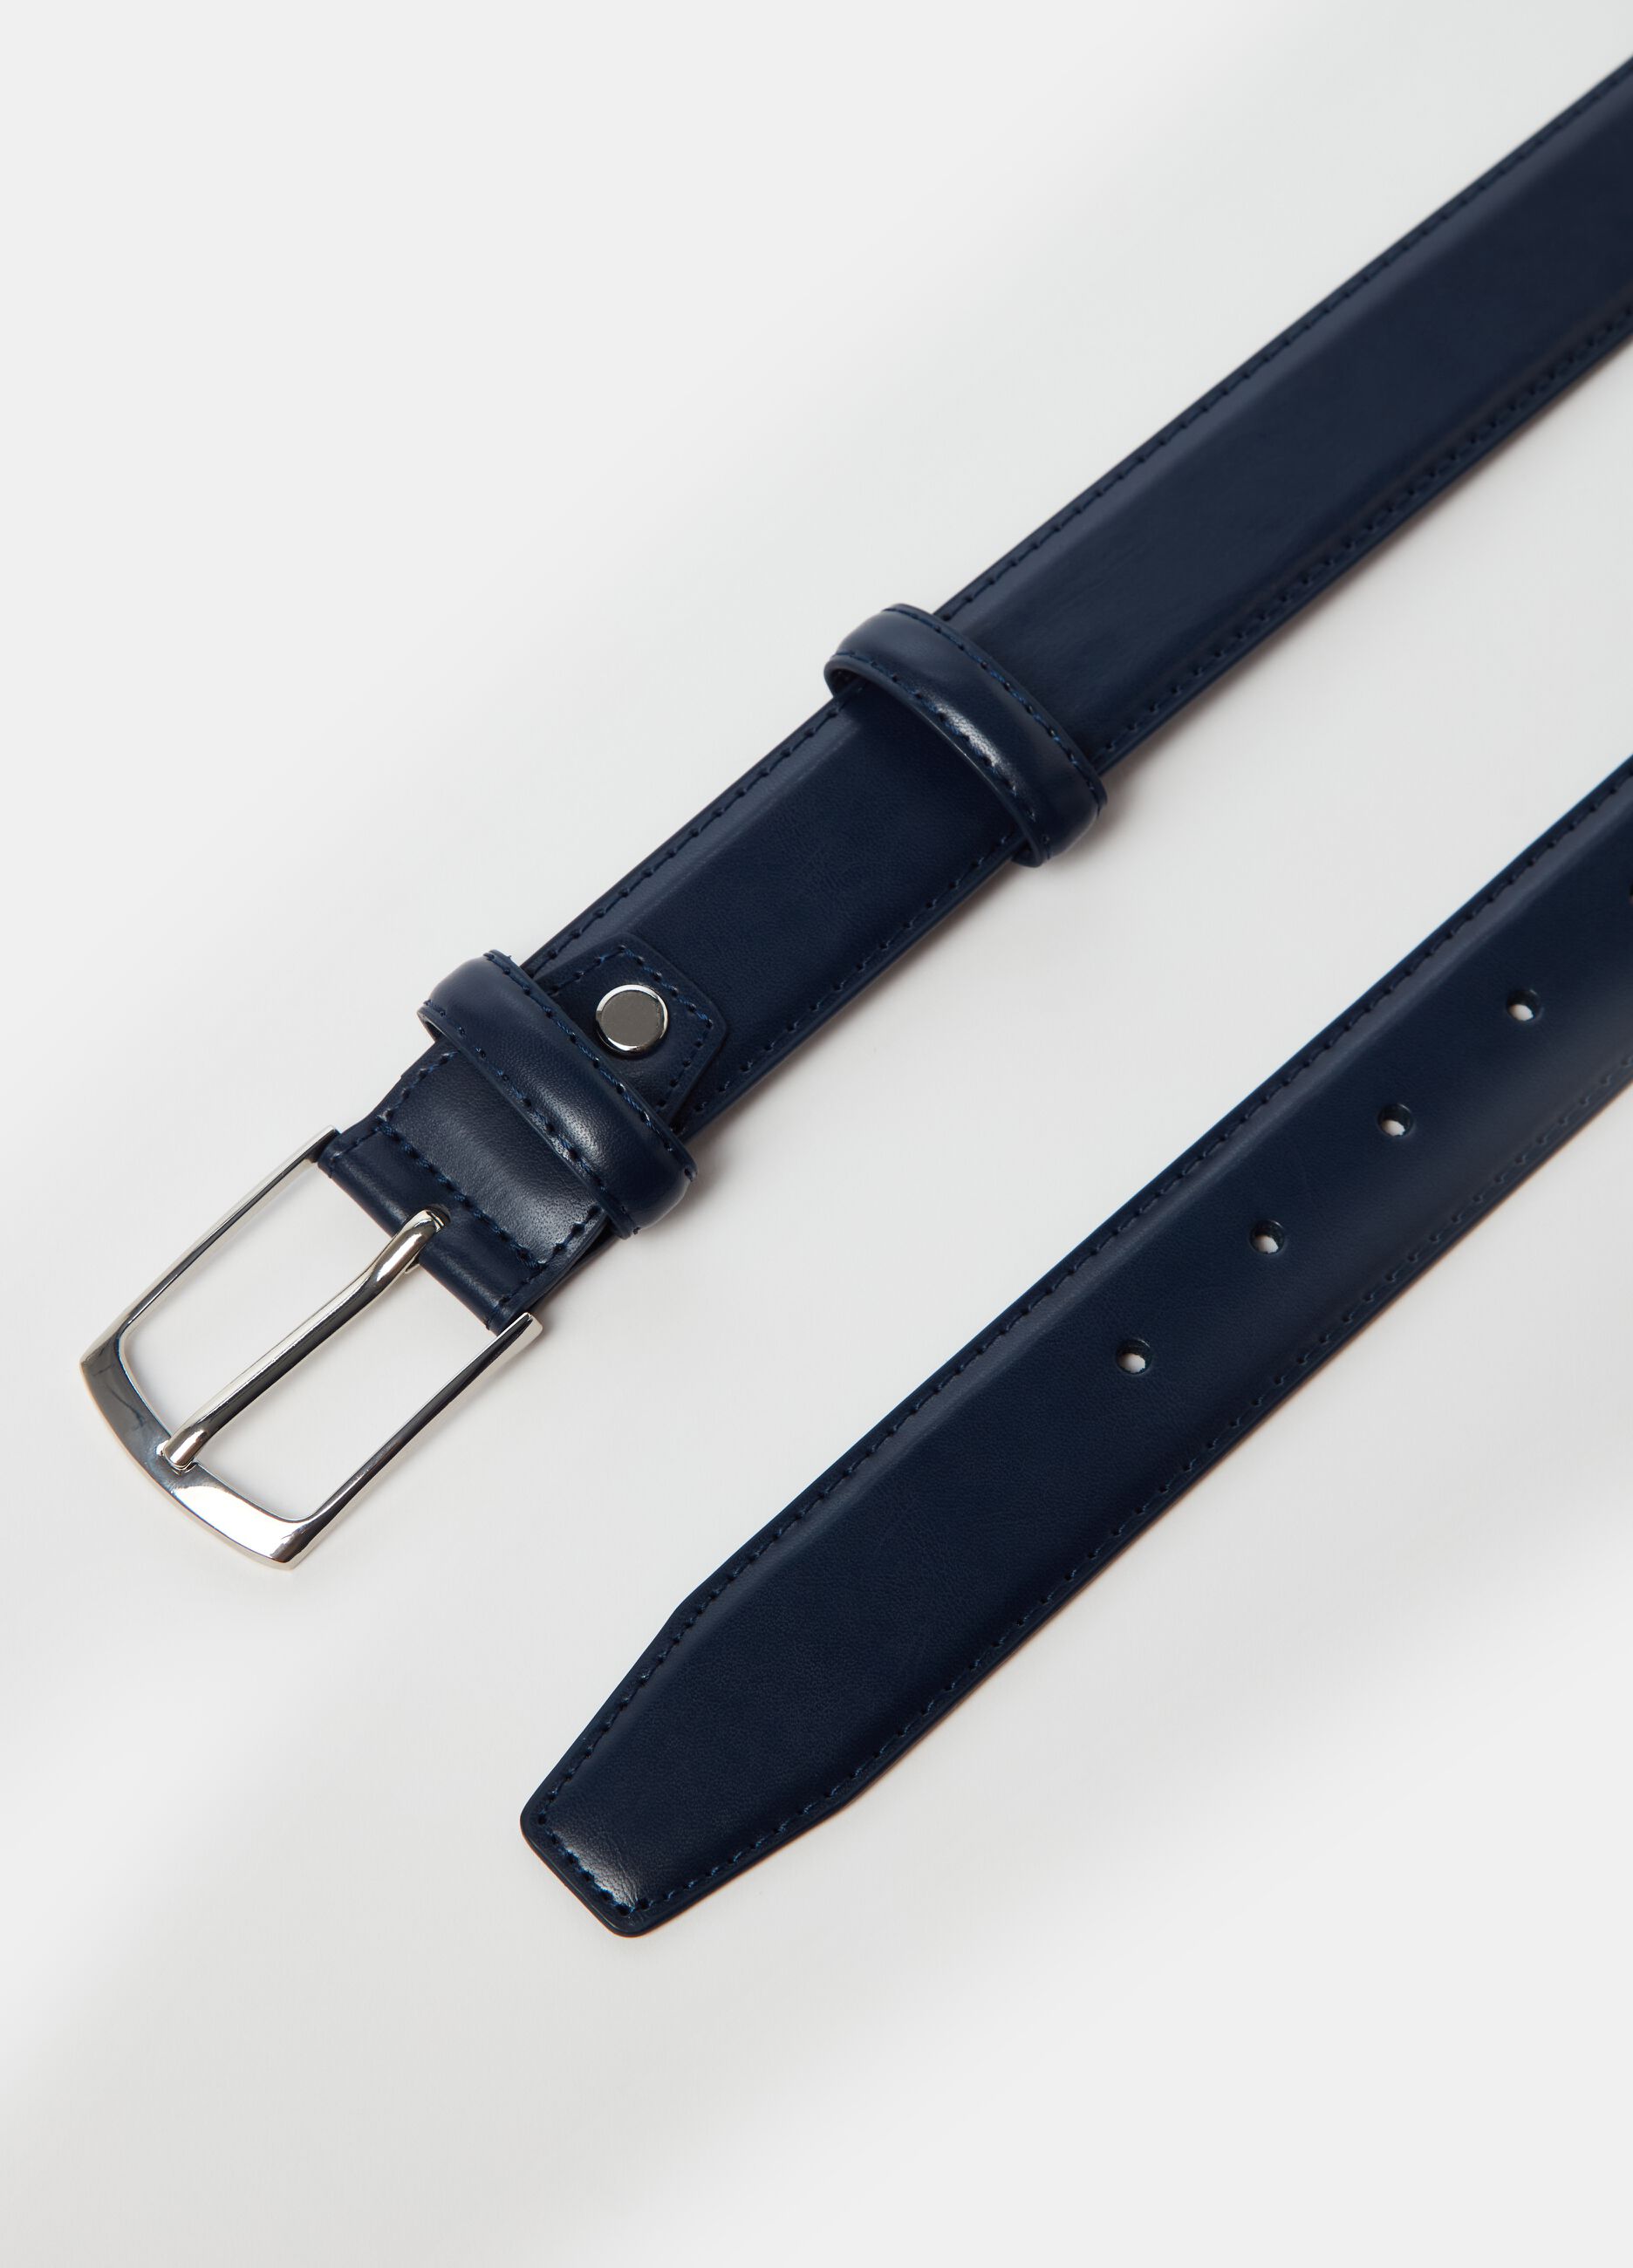 Skinny belt with square buckle